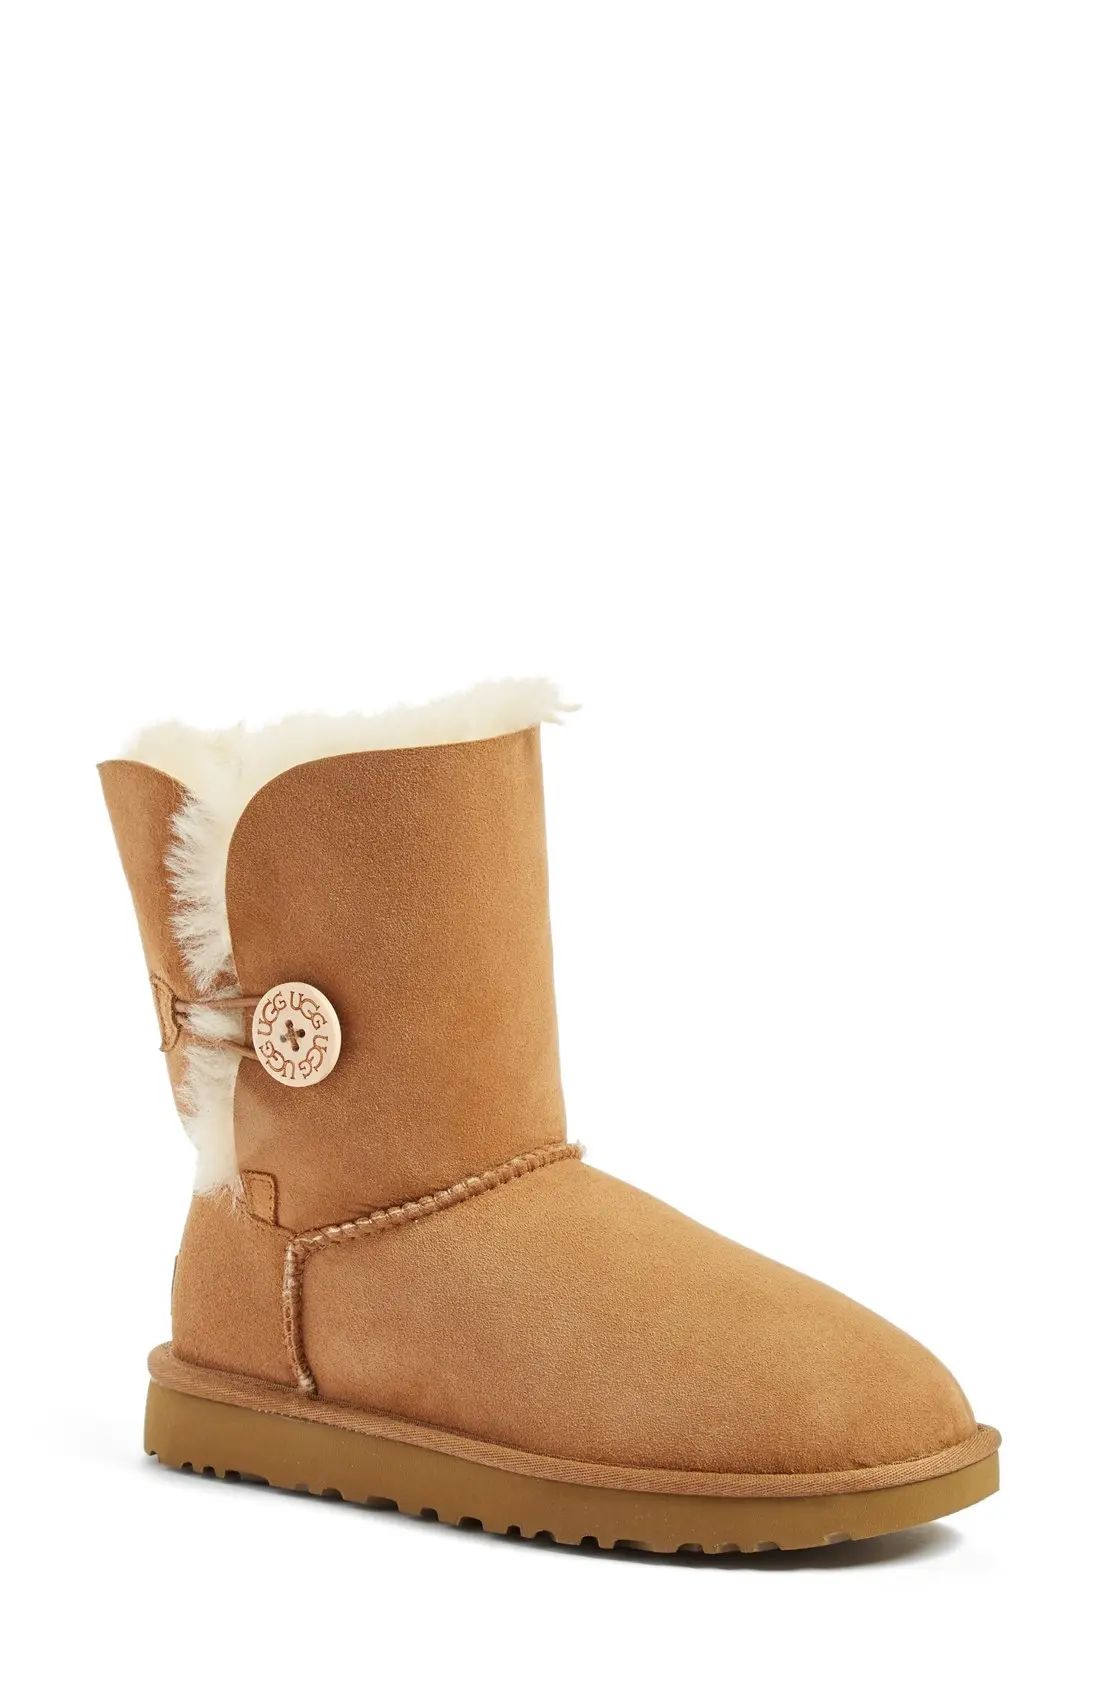 UGG(R) Bailey Button II Boot, Size 6 in Chestnut Suede at Nordstrom | Nordstrom